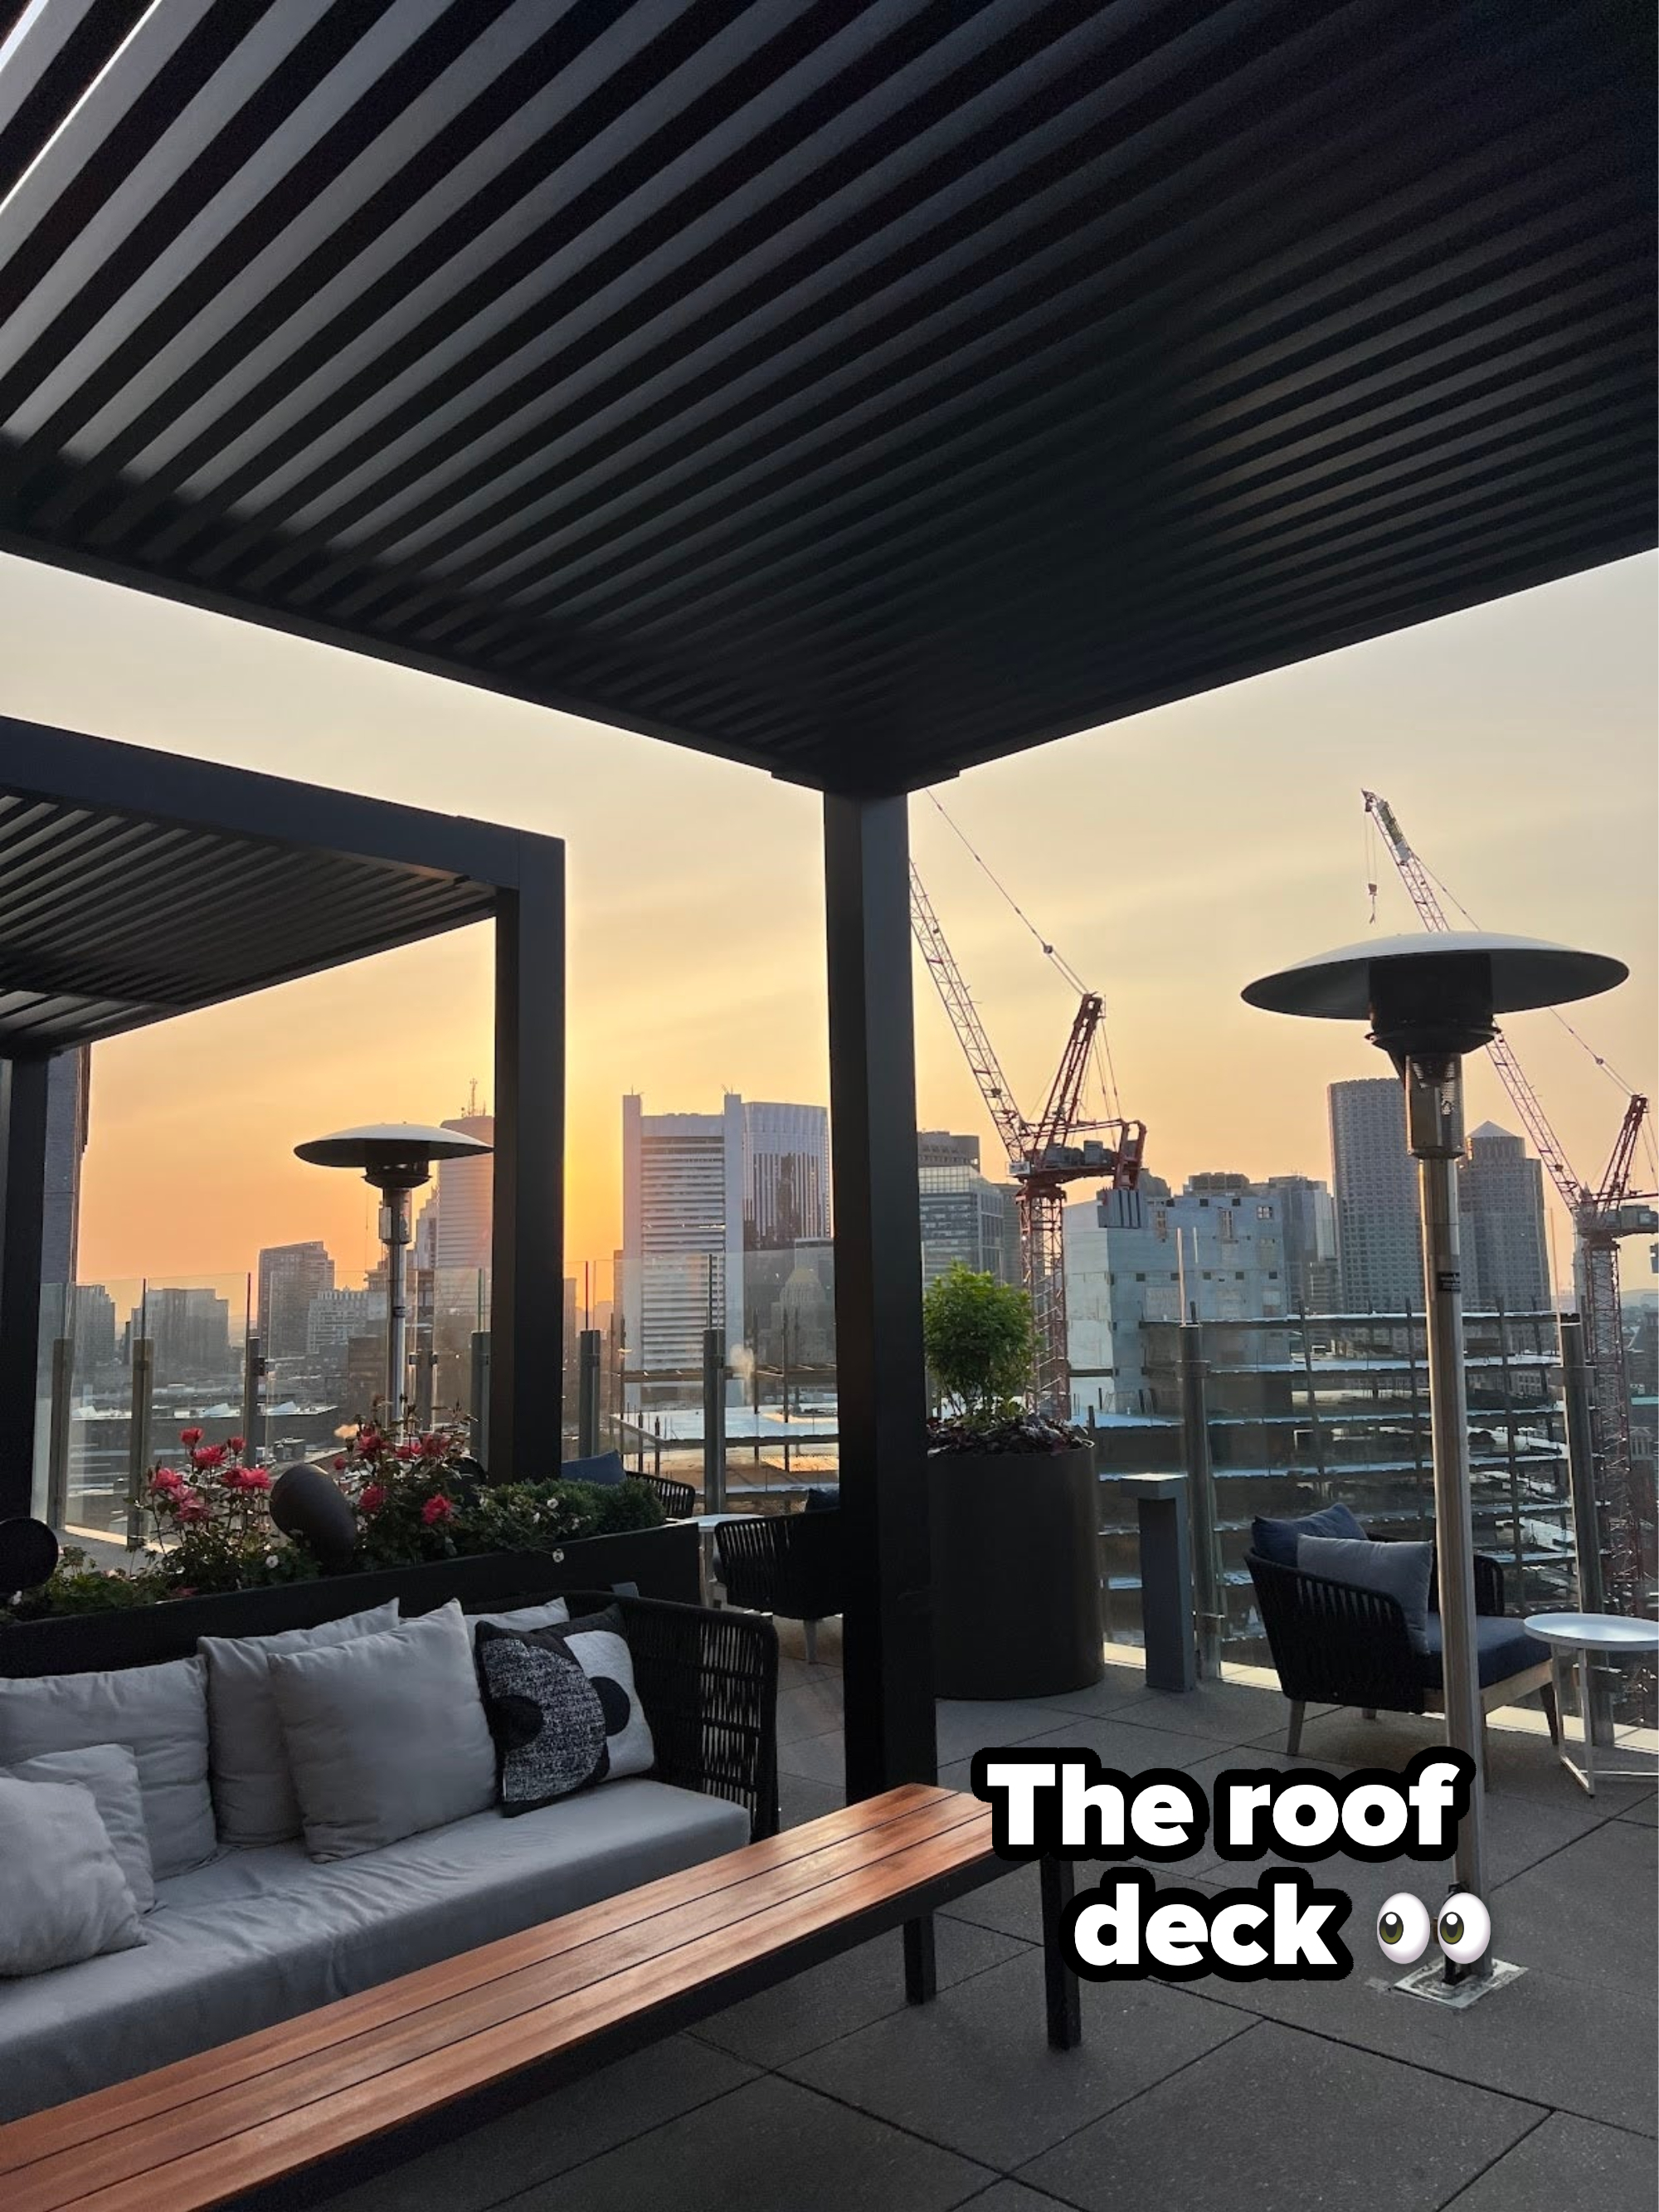 The roof deck featuring an outdoor patio with furniture during sunset